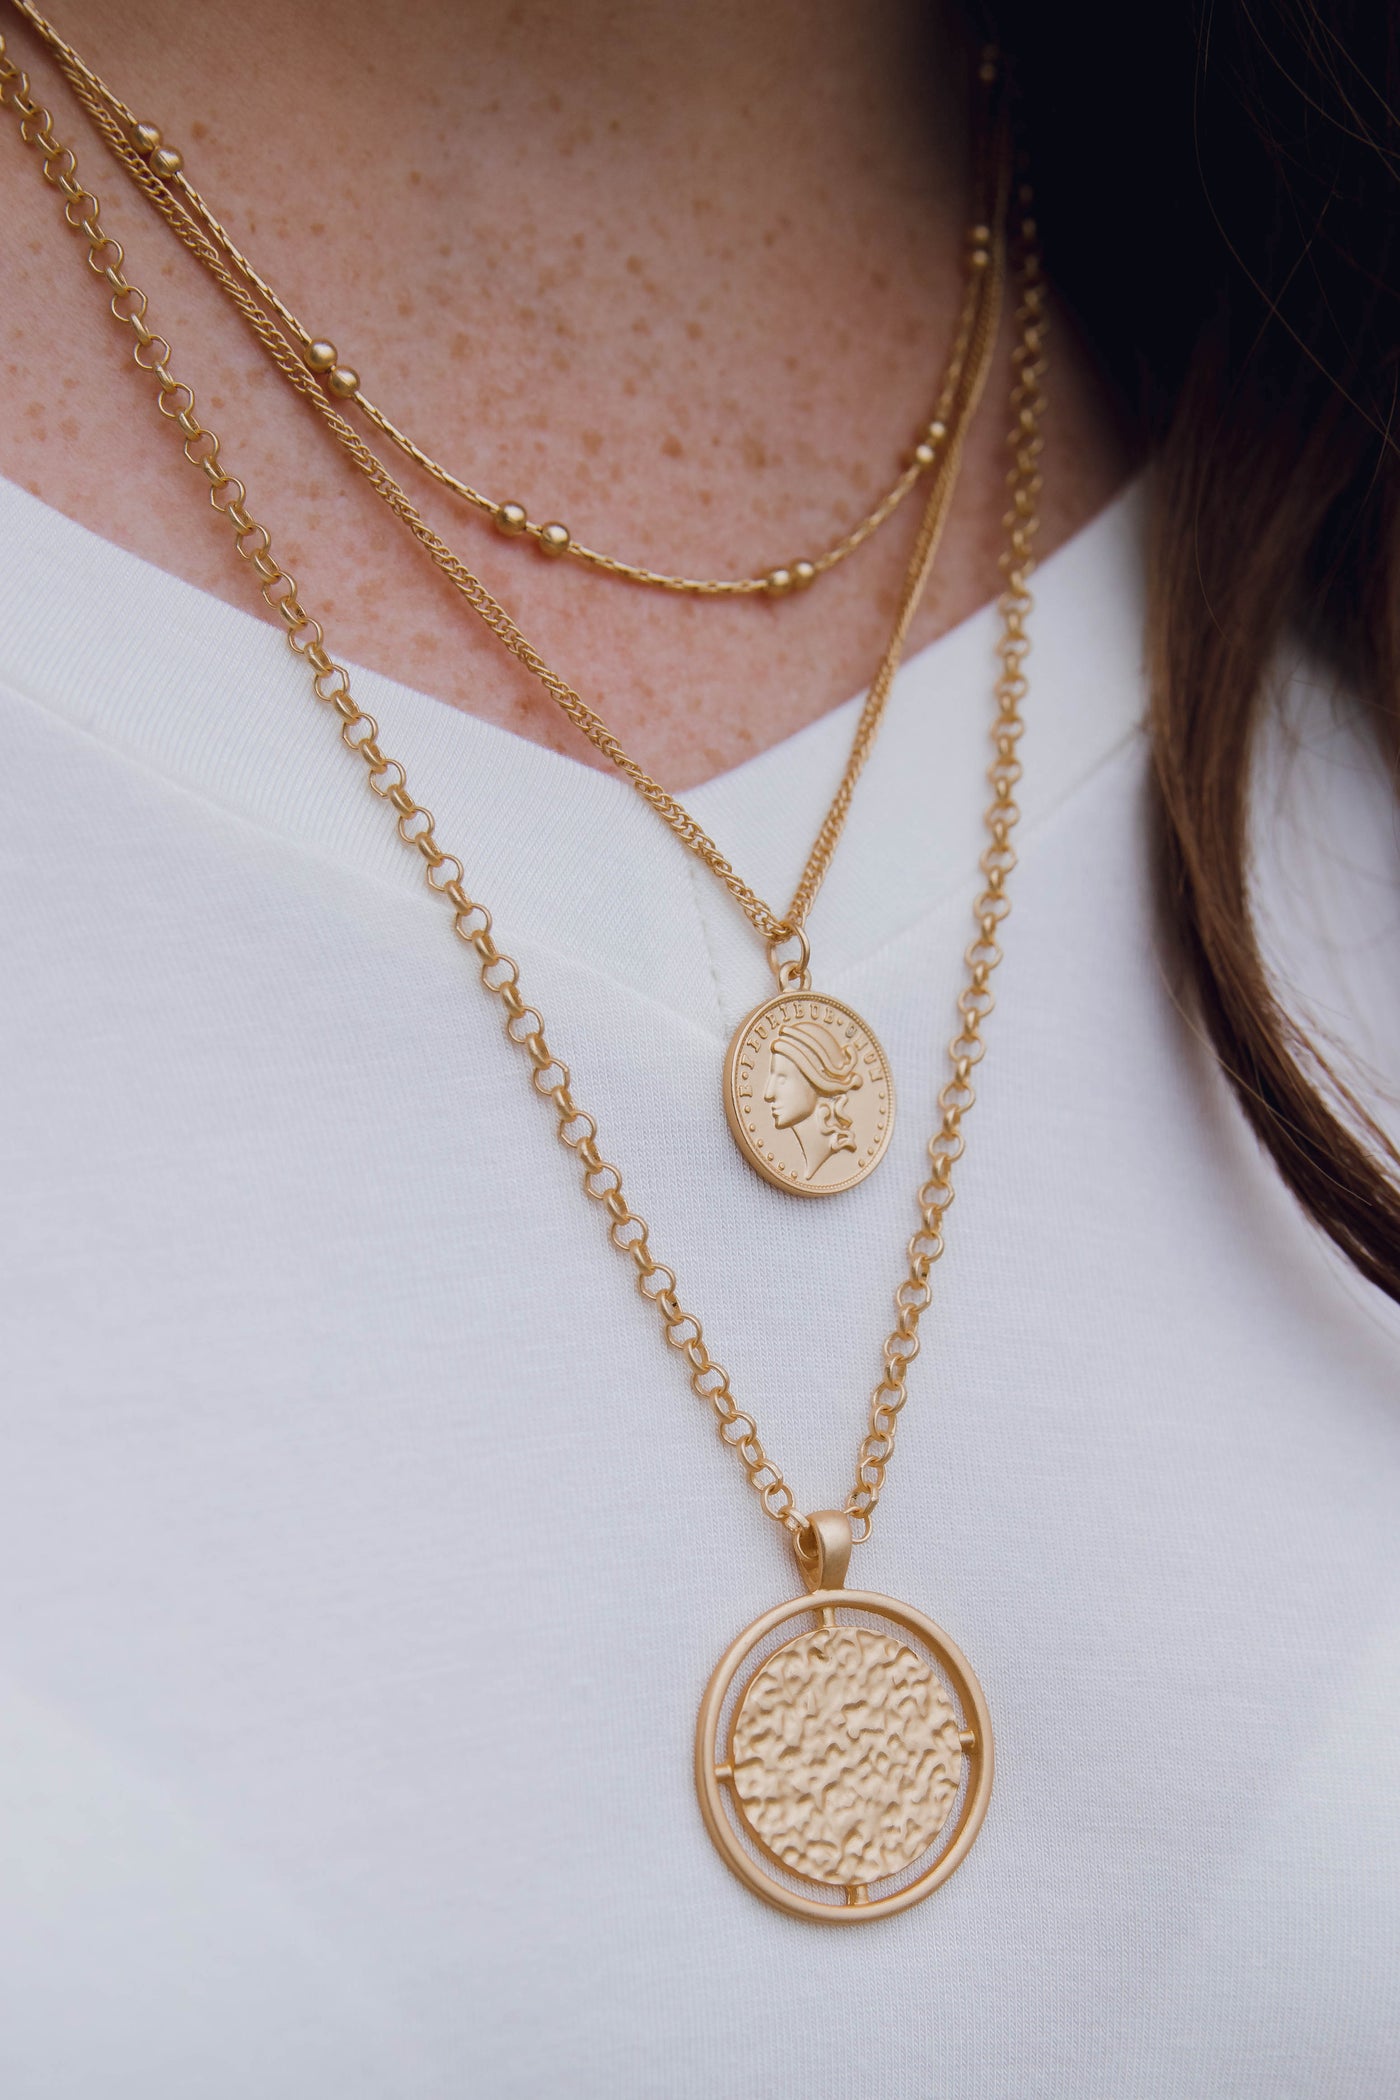 Canvas Layered Coin Necklace- Gold Coin Necklace- Trendy Jewelry For Women